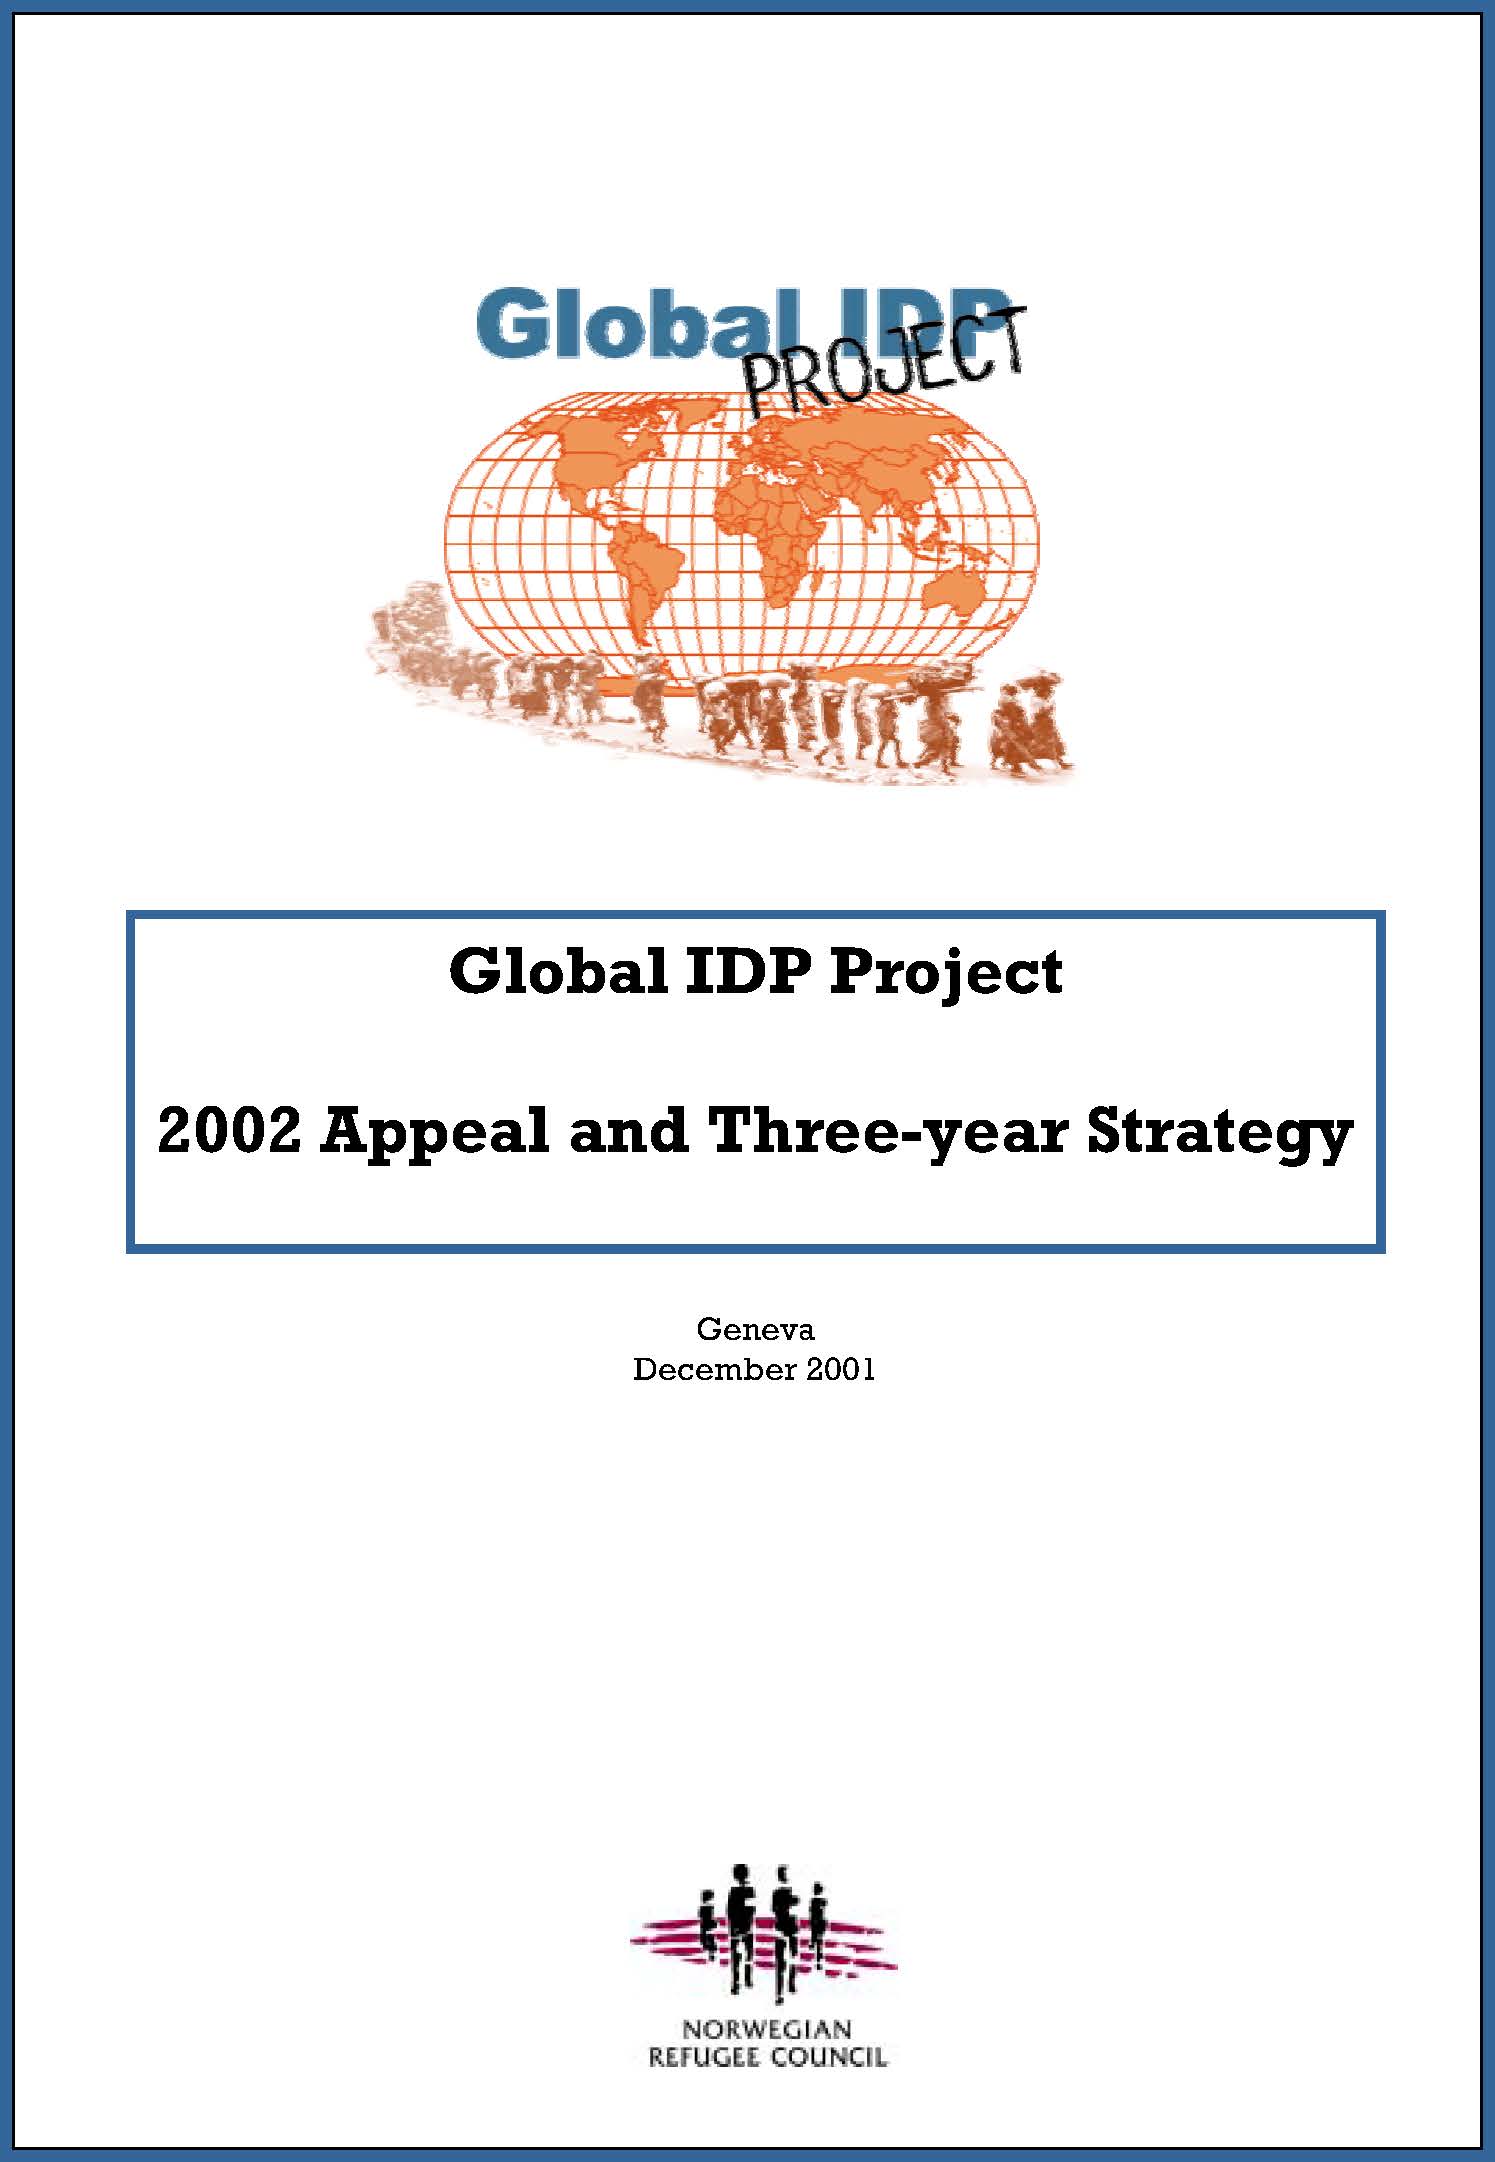 2002 Appeal and Three-year Strategy